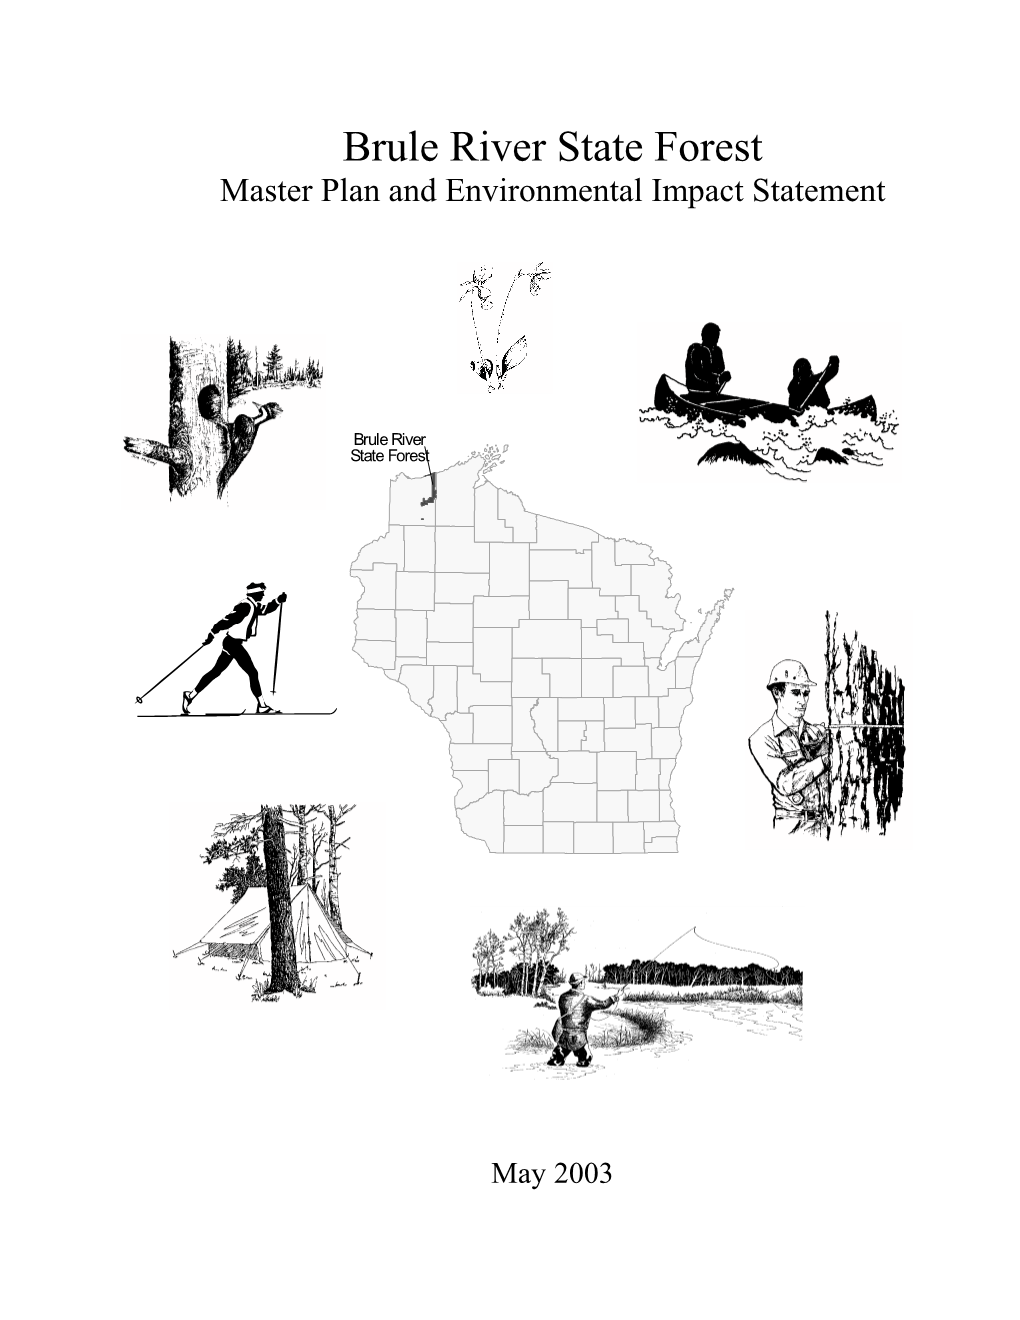 Brule River State Forest Master Plan and Environmental Impact Statement